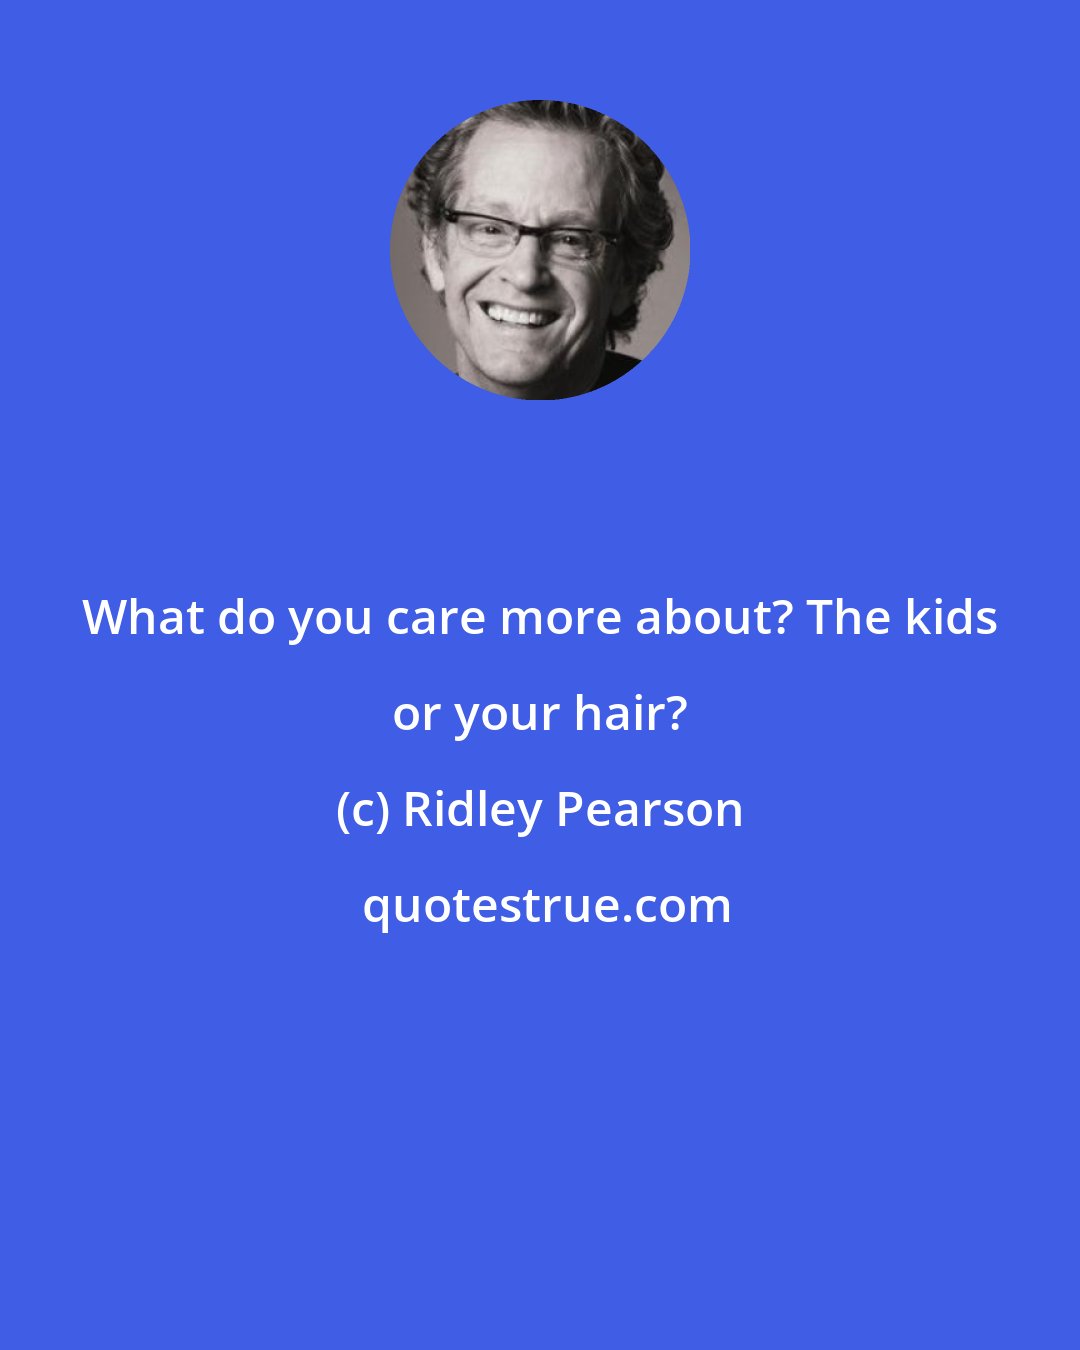 Ridley Pearson: What do you care more about? The kids or your hair?